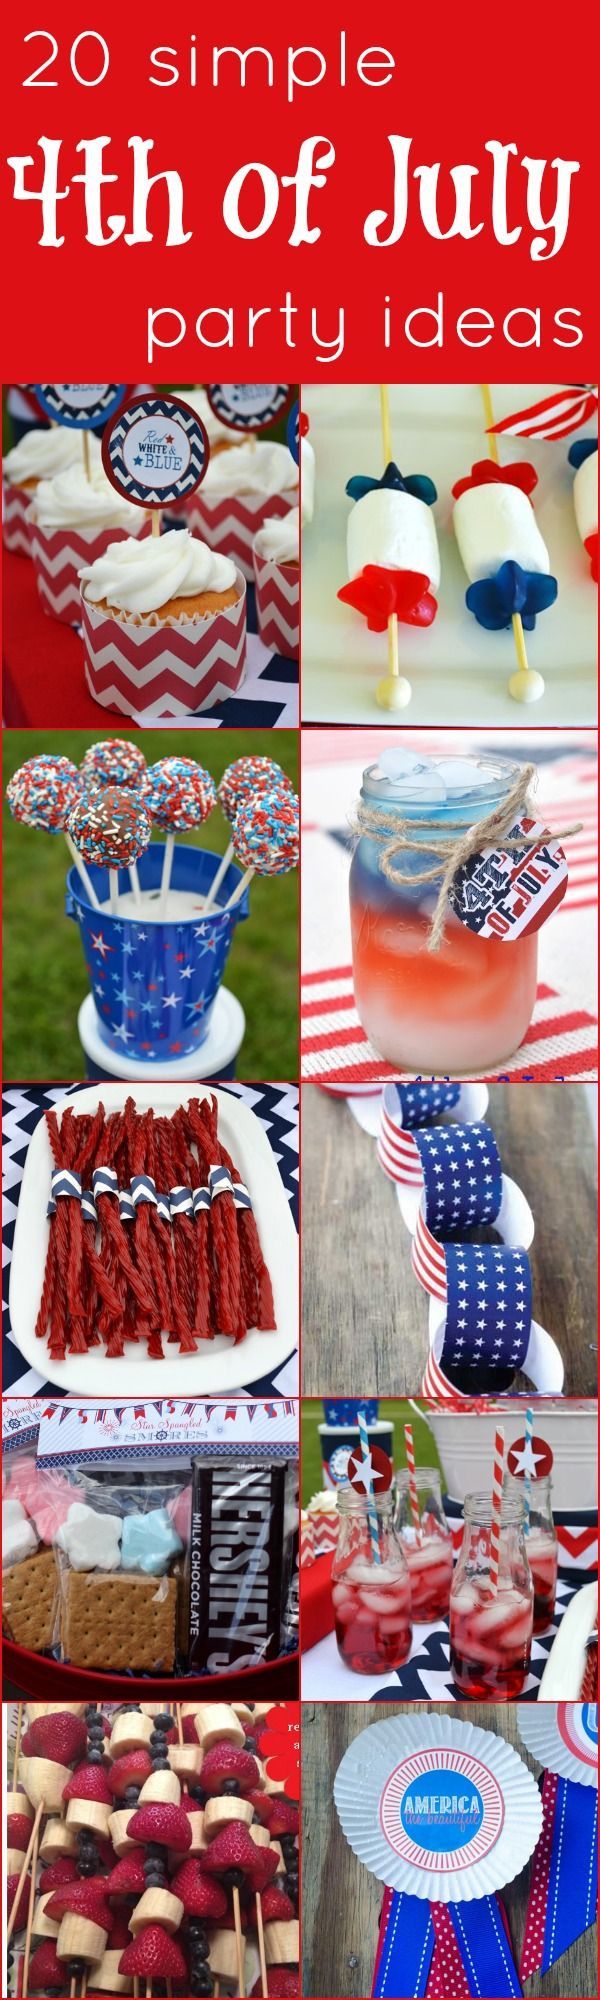 Pinterest Fourth Of July Party
 20 Simple 4th of July Party Ideas from the best blogger on